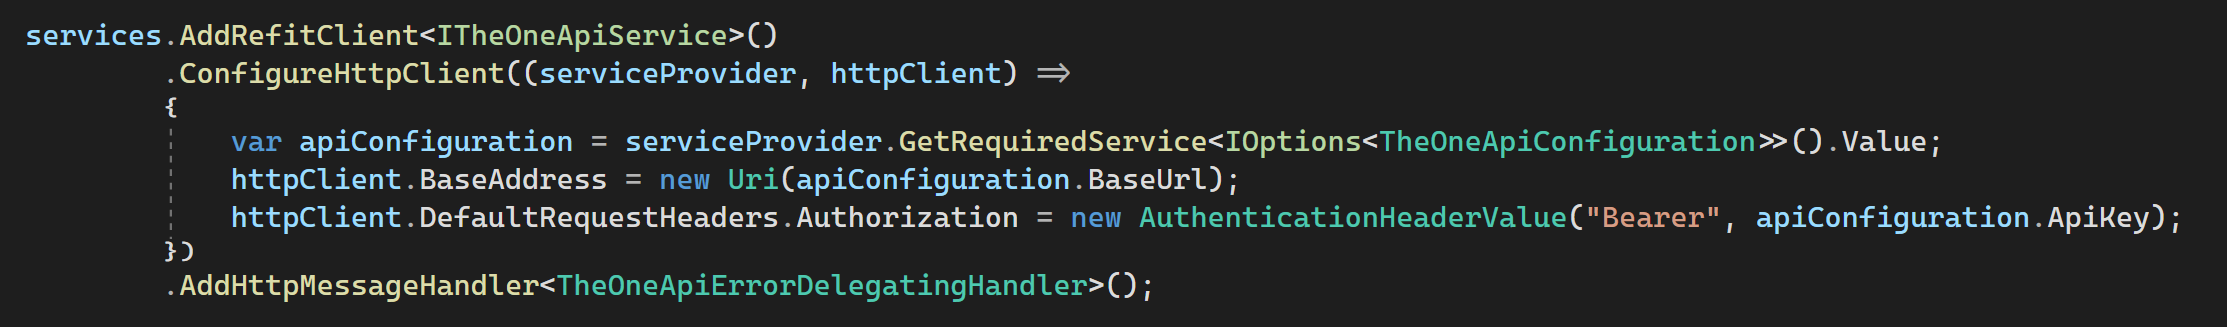 The code for registering the services using Refit.